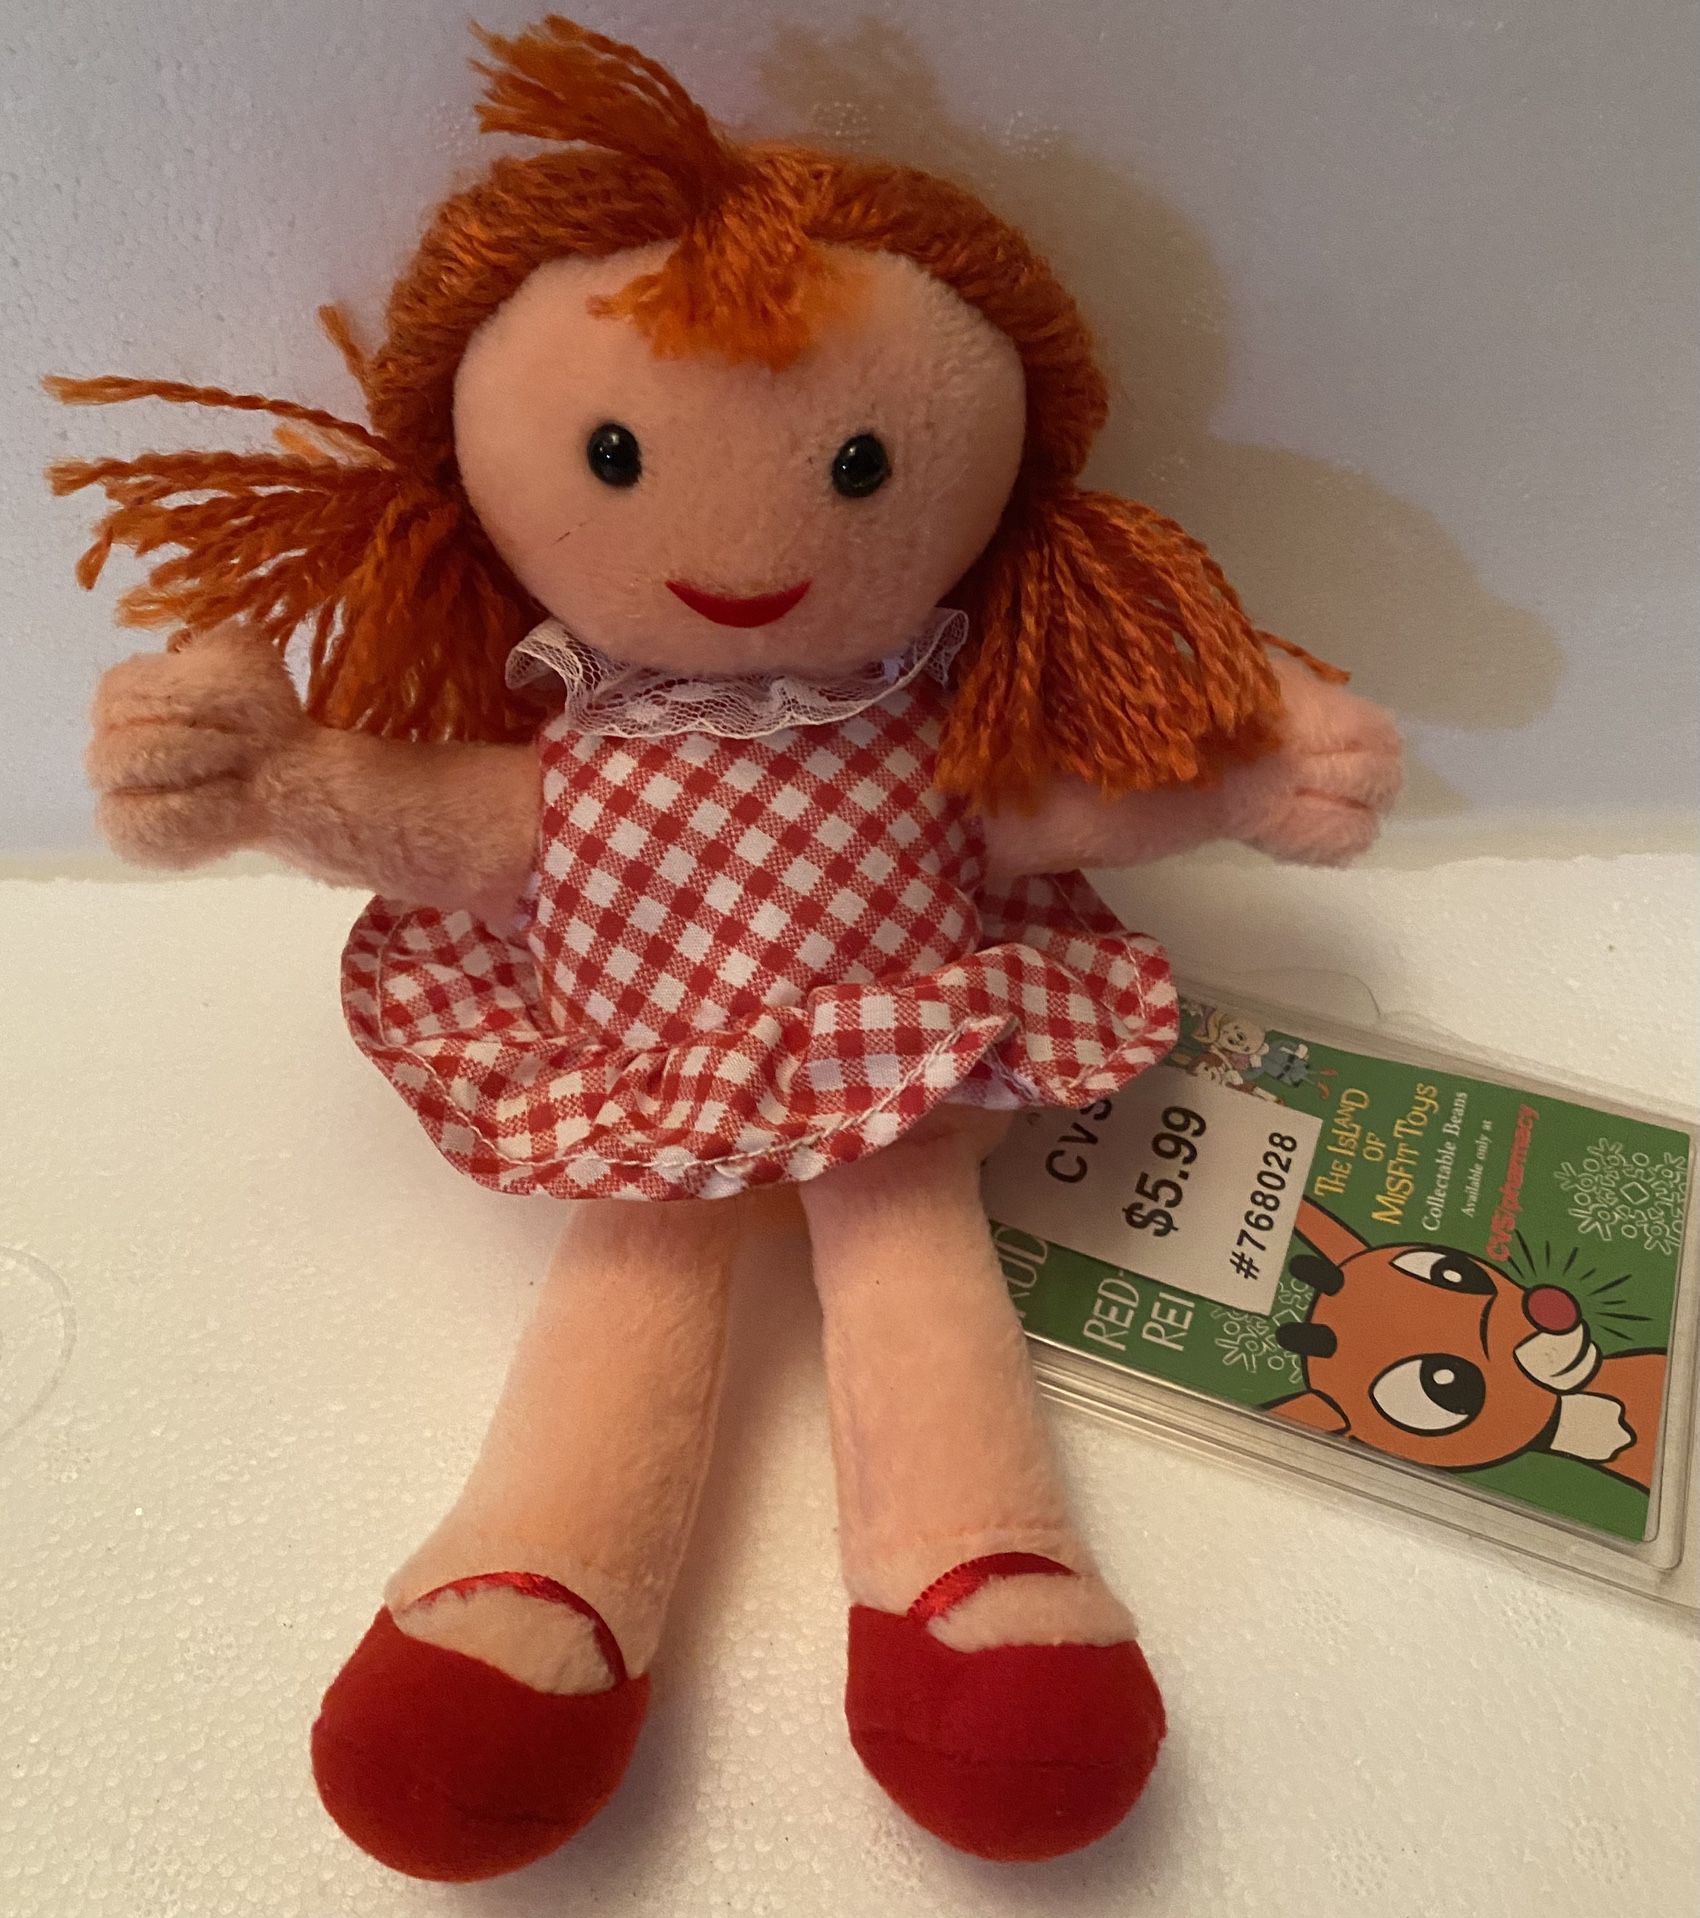 Vintage New ‘98 Dolly for Sue Stuffins CVS 8" Rag Doll Plush Rudolph Misfit Toys Collectible W/Tags